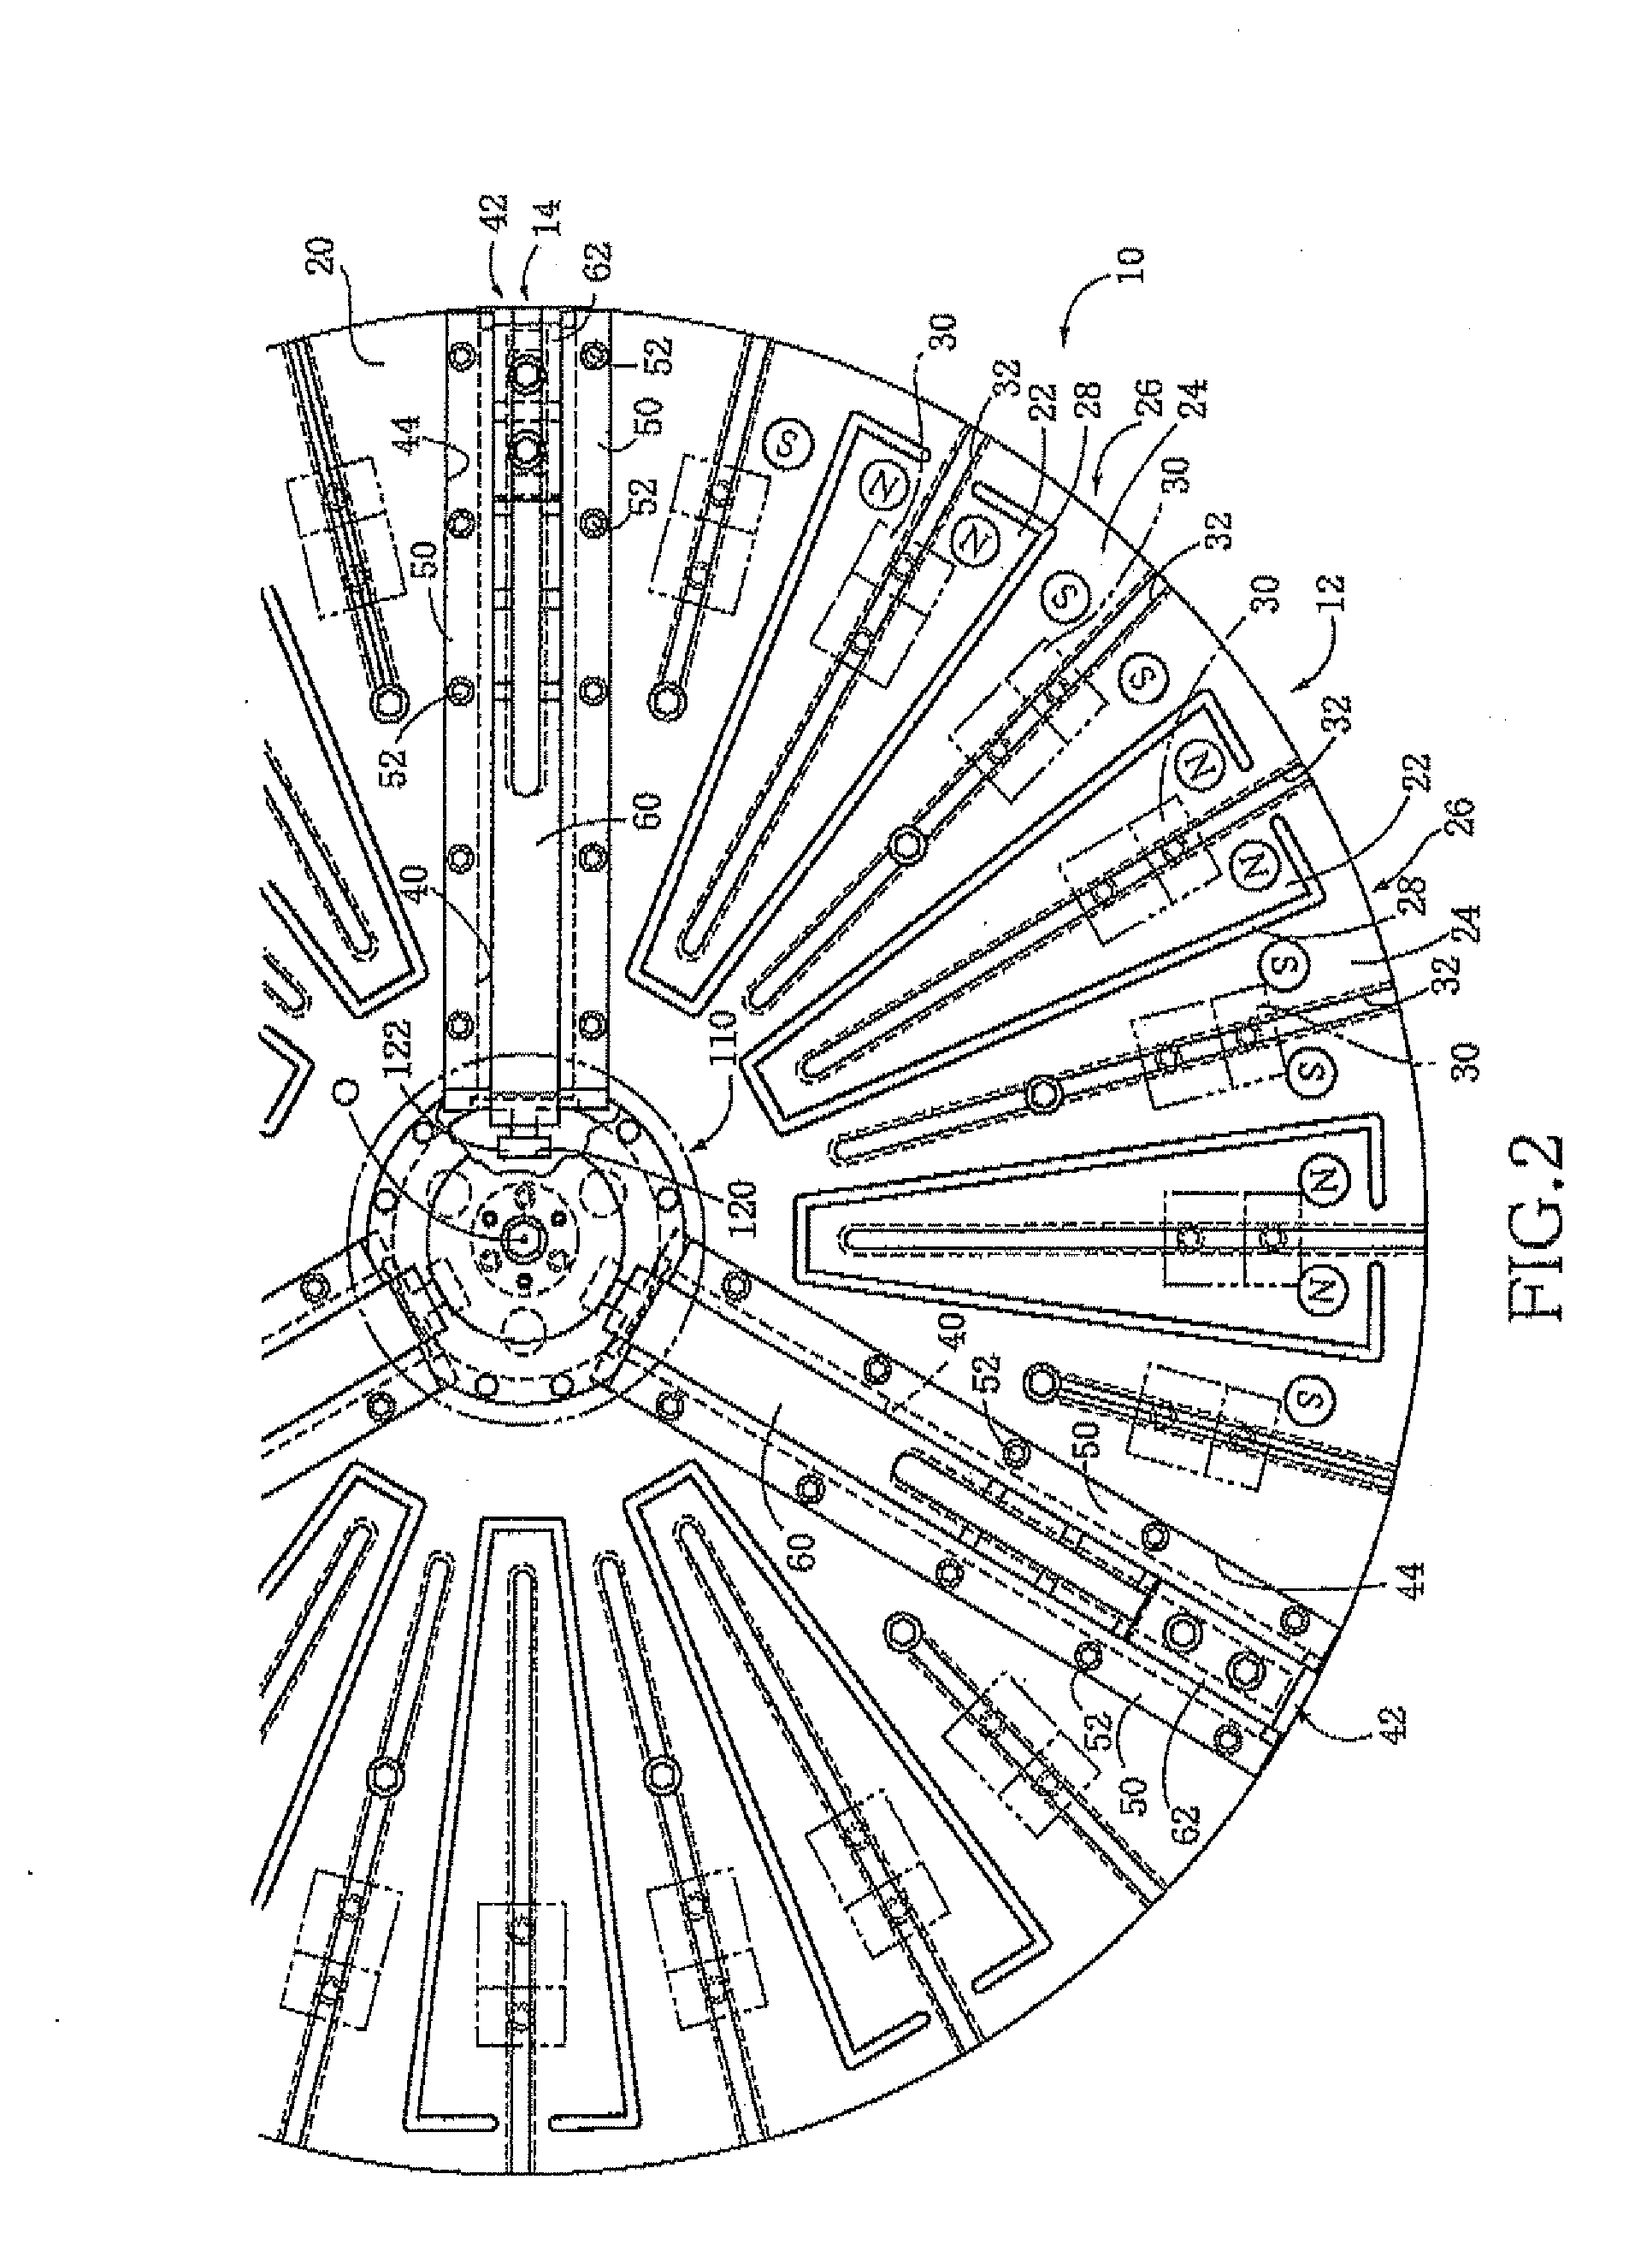 High precision chuck with centering function